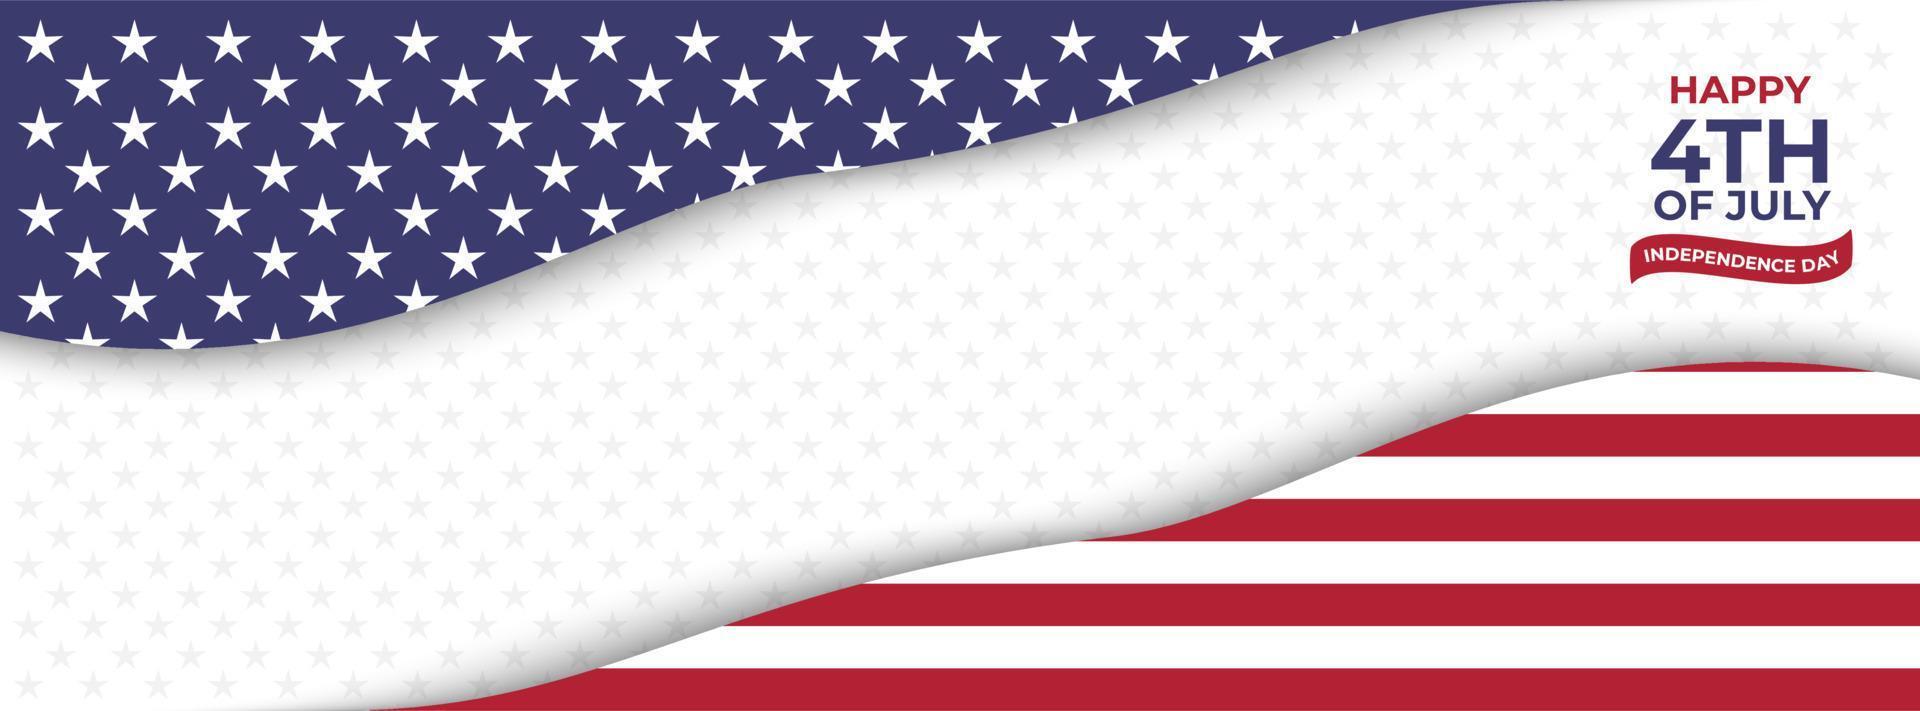 Landscape Background Template for united states independence day banner vector